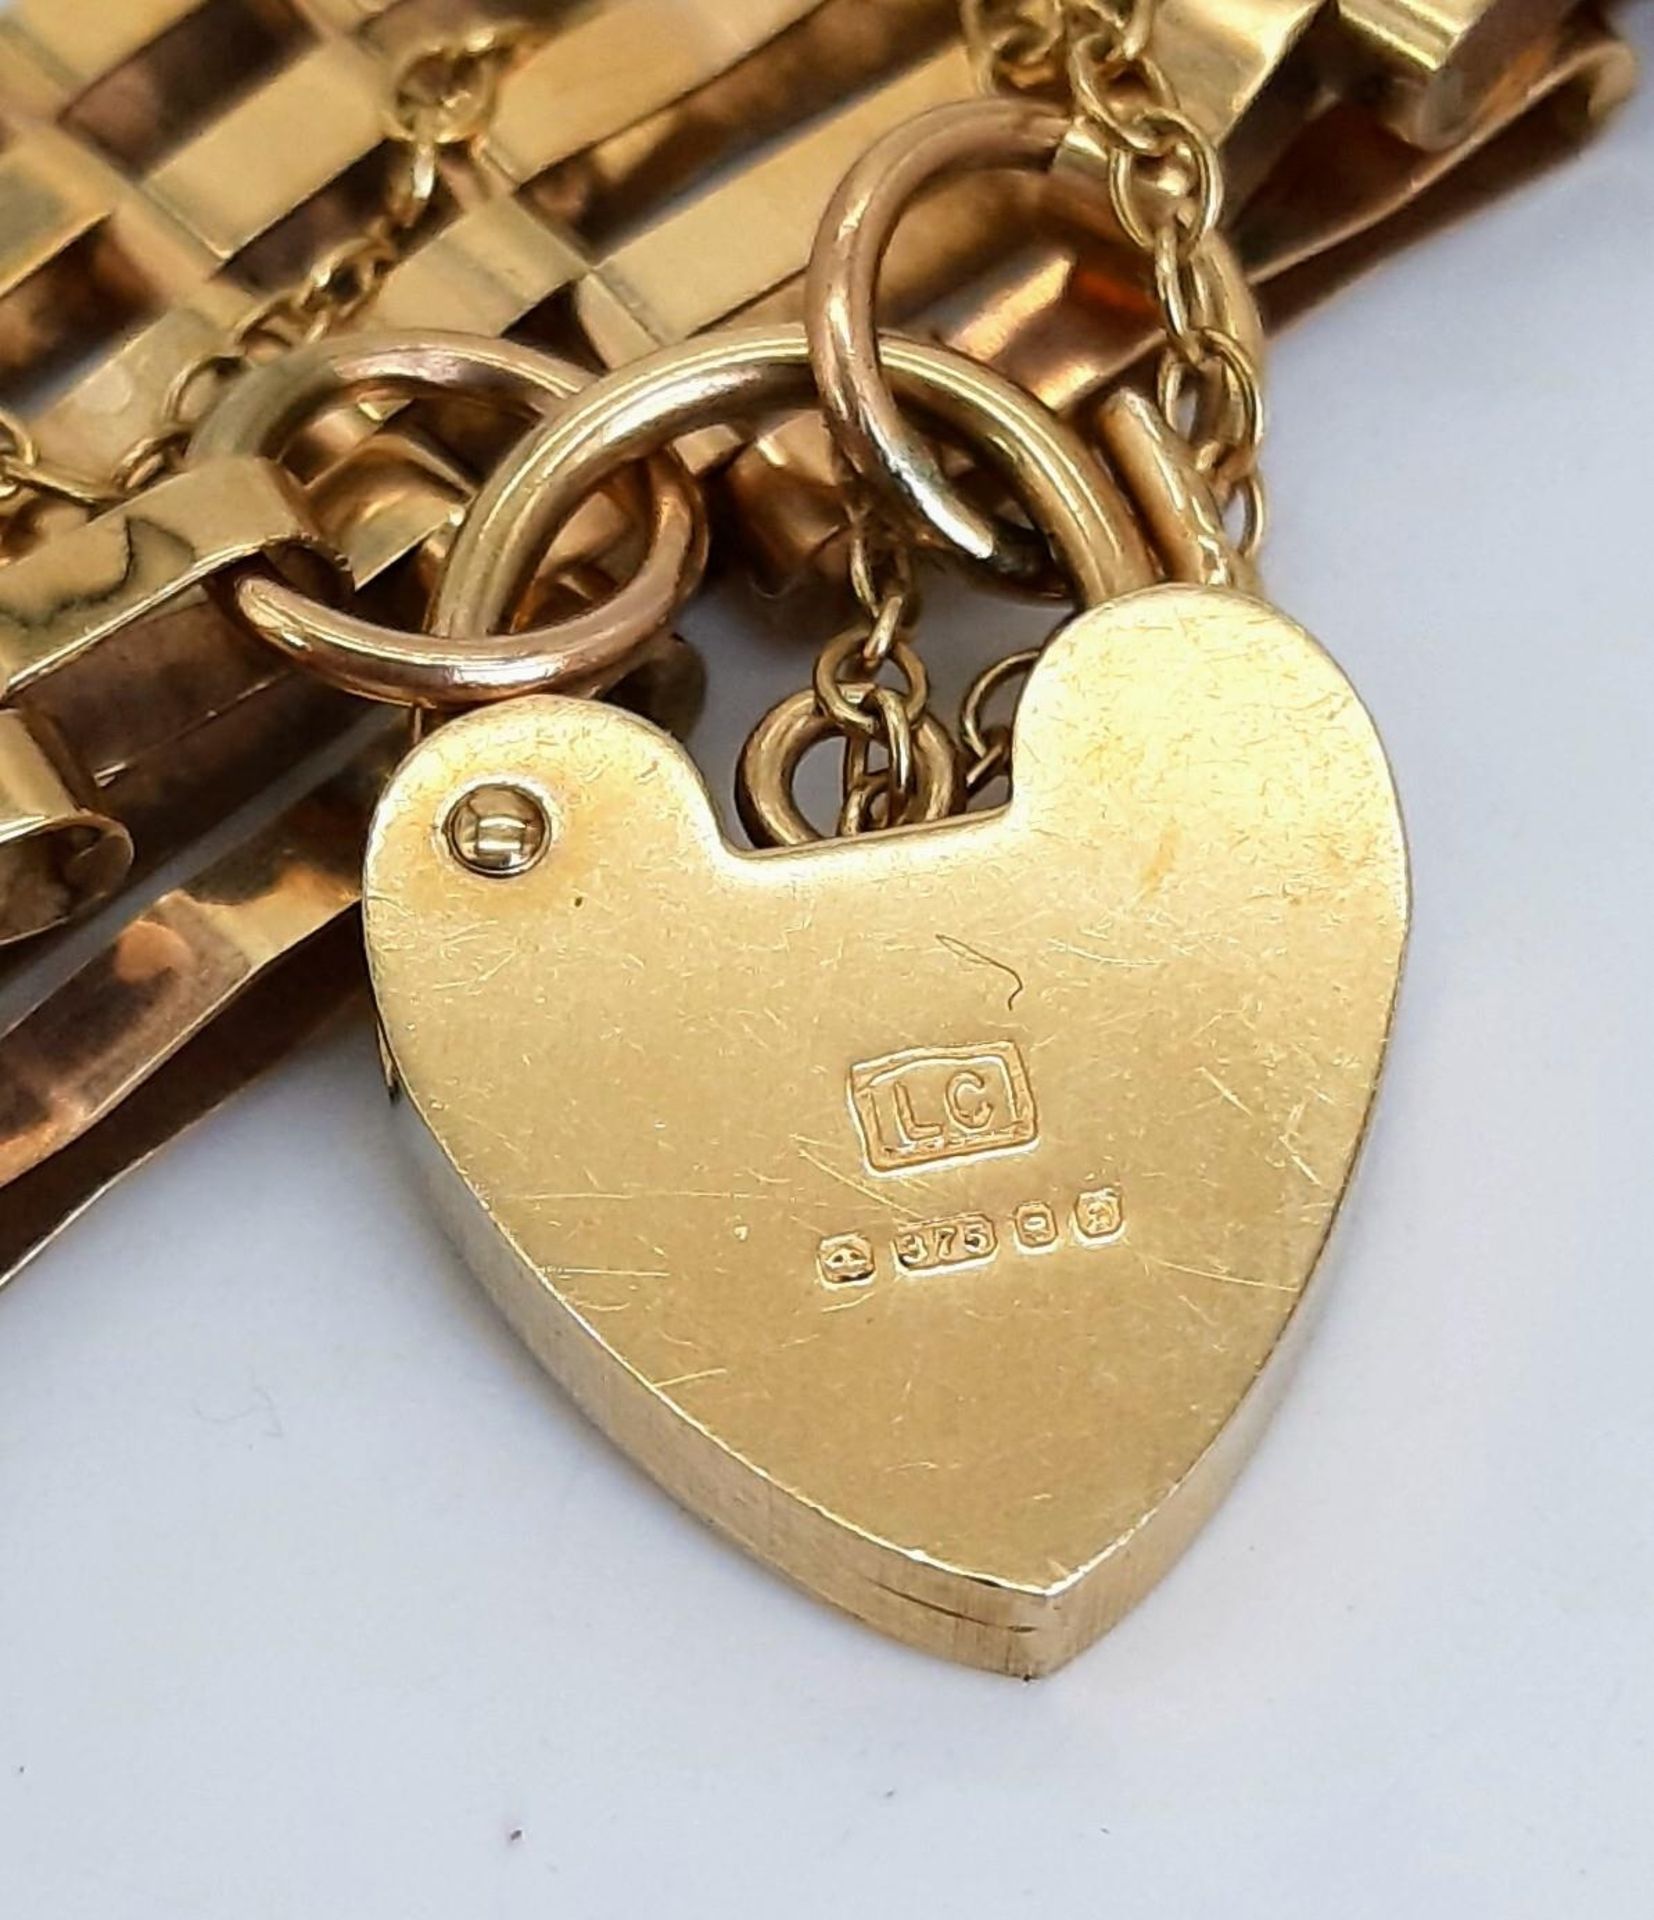 A Vintage 9K Yellow Gold Gate Bracelet with Heart Clasp. 16cm. 11.11g weight. - Image 4 of 4